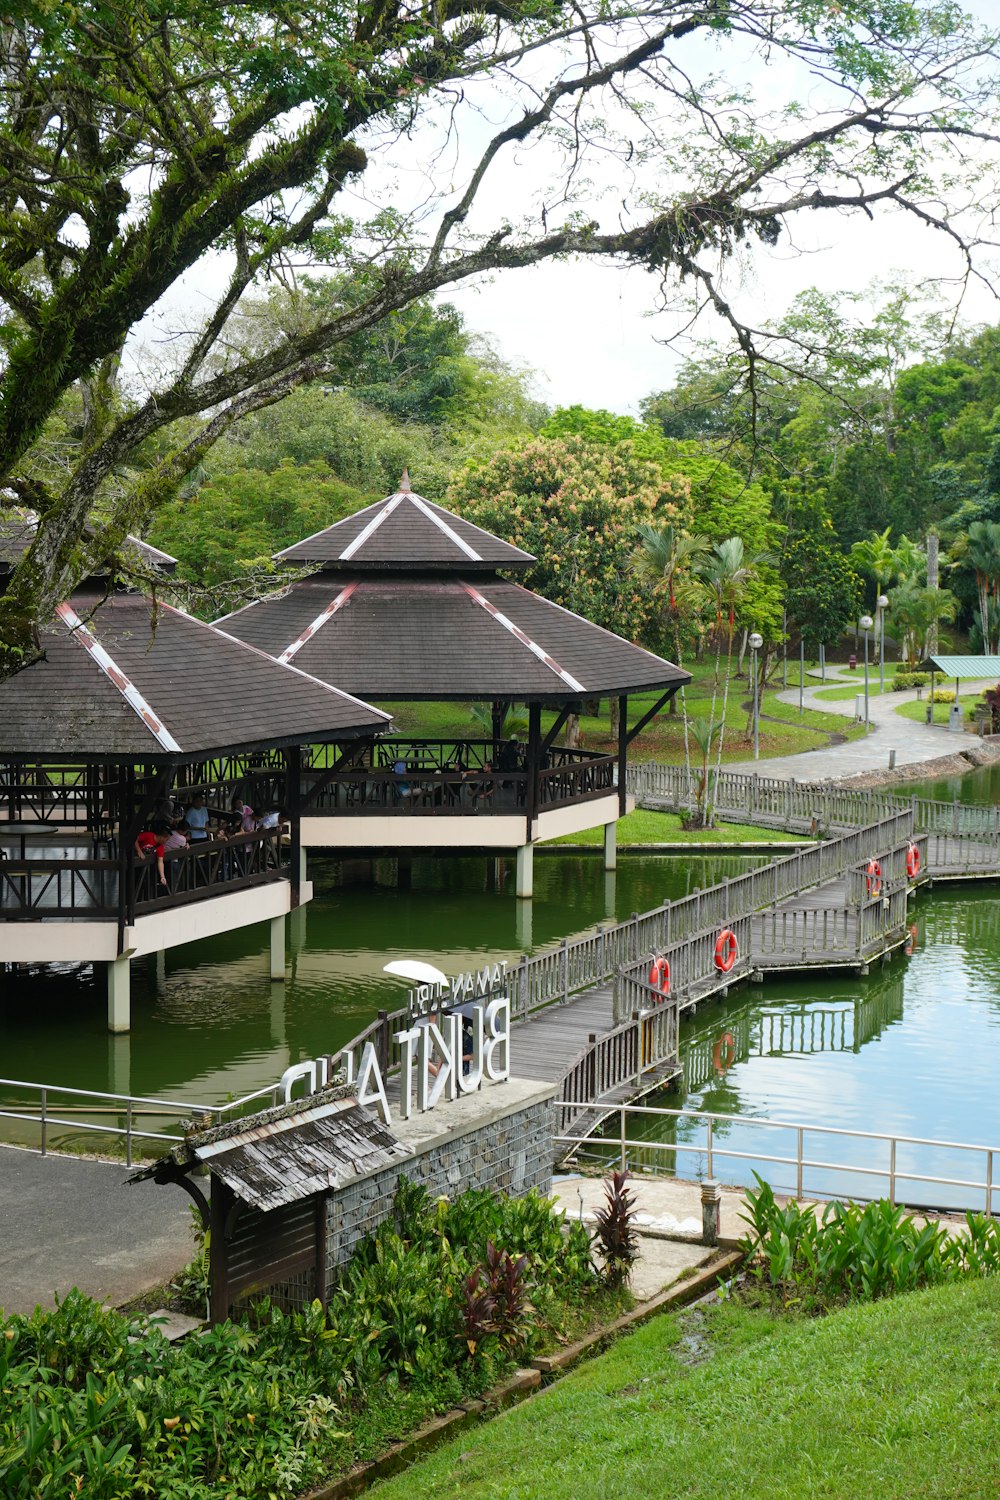 a park with several pavilions and a lake